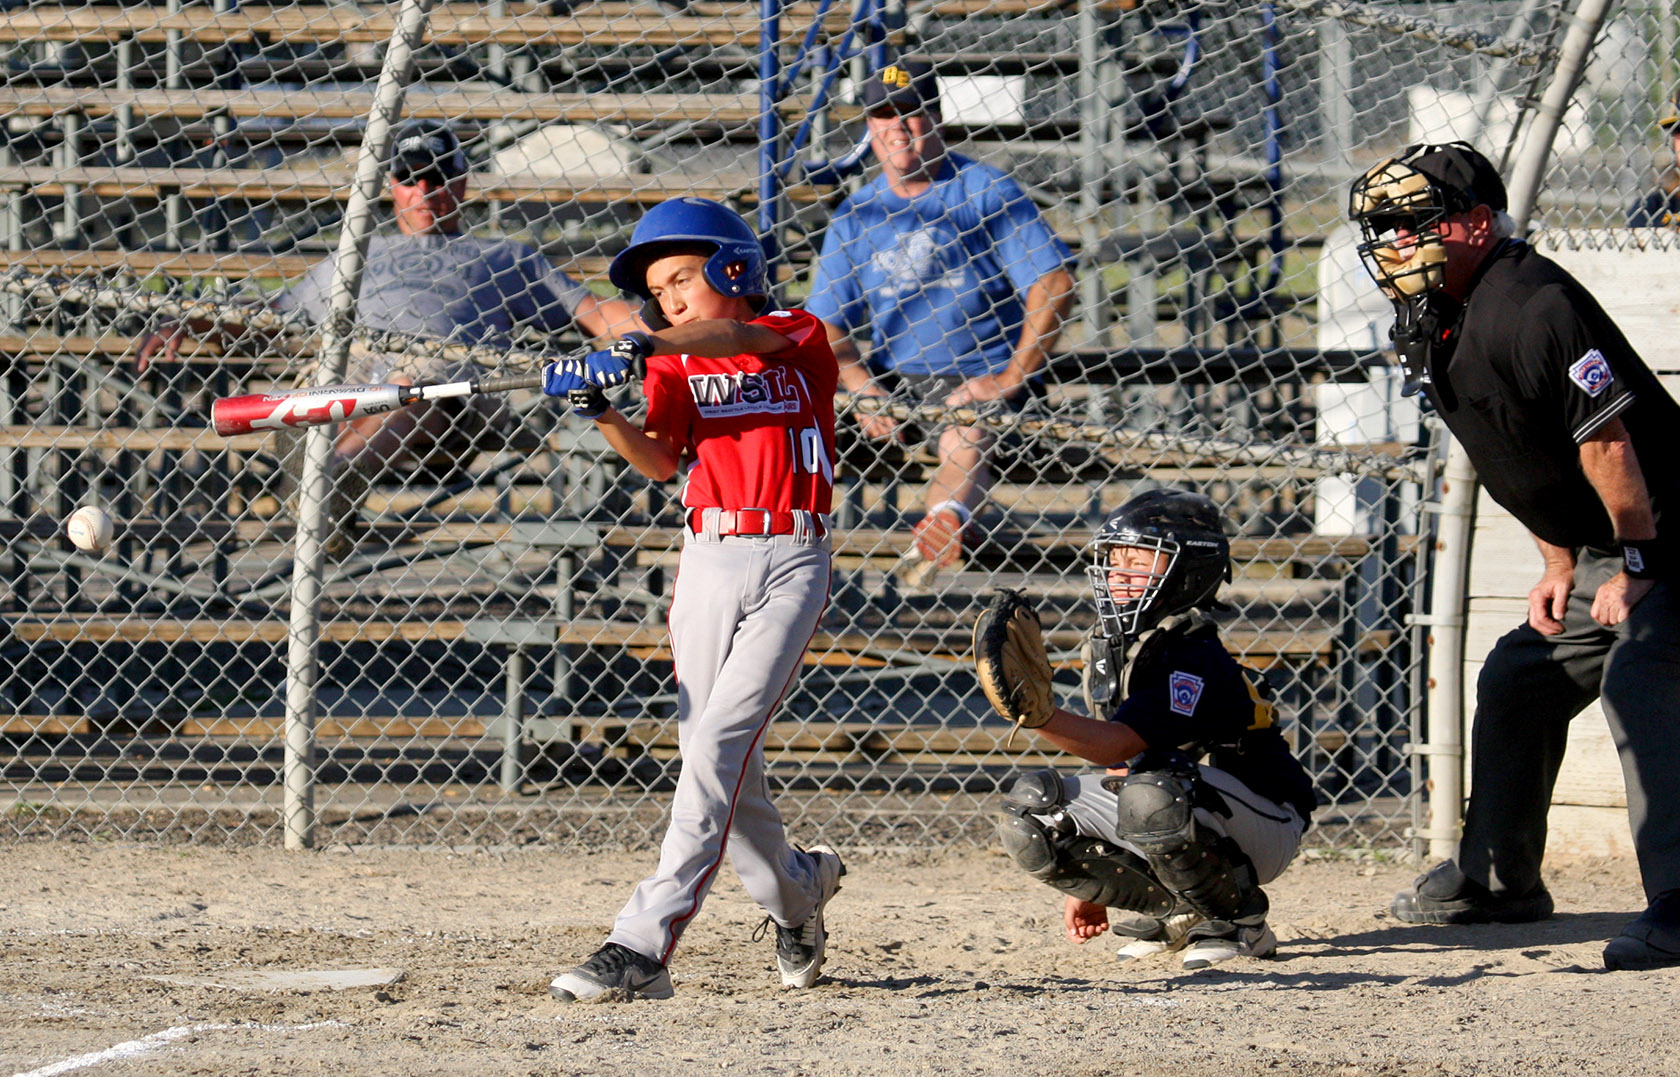 Cameron Fitterer of West Seattle gets a base hit down the third base line.